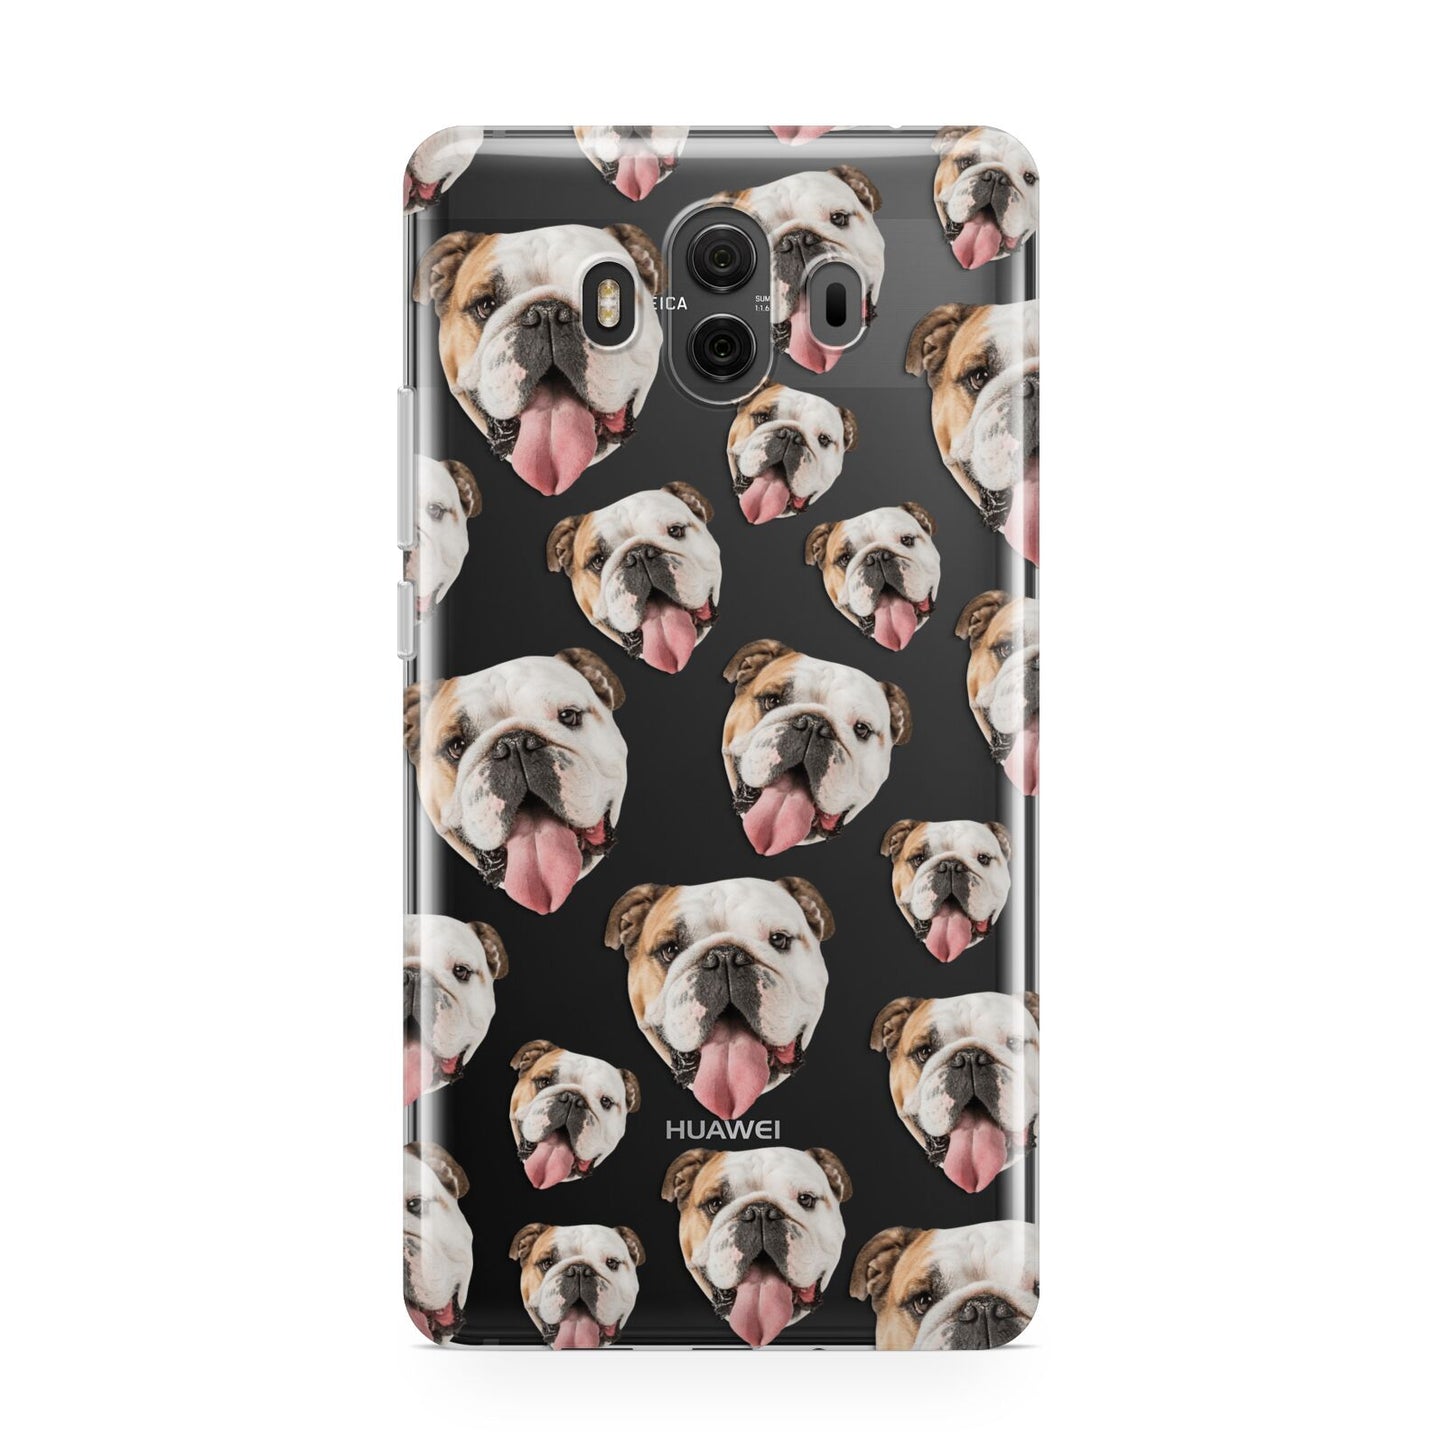 Dog Photo Face Huawei Mate 10 Protective Phone Case